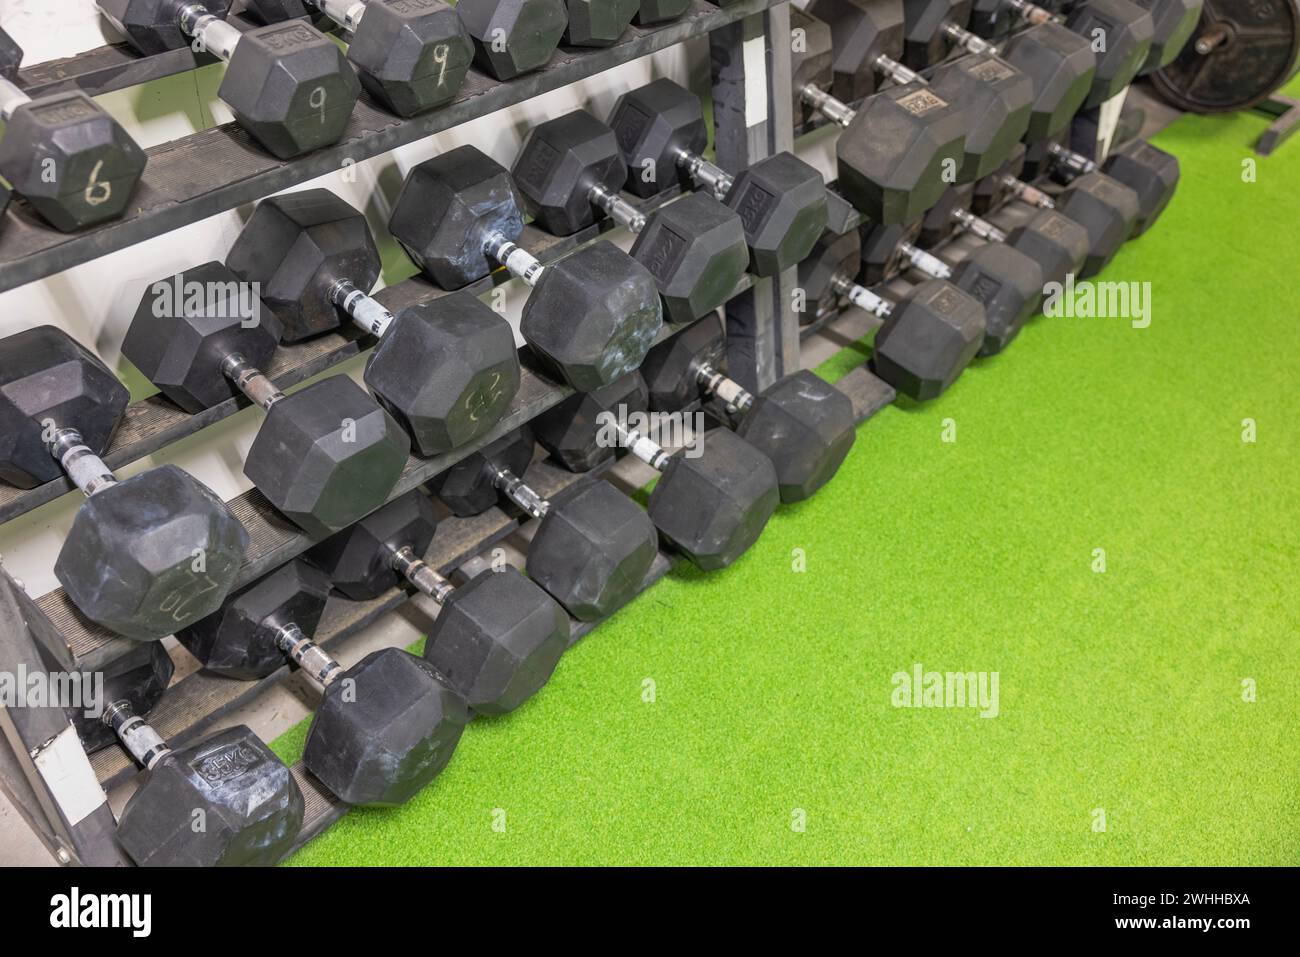 Close-up look at racks holding dumbbells of varying weights for comprehensive training experience. Sweden. Stock Photo